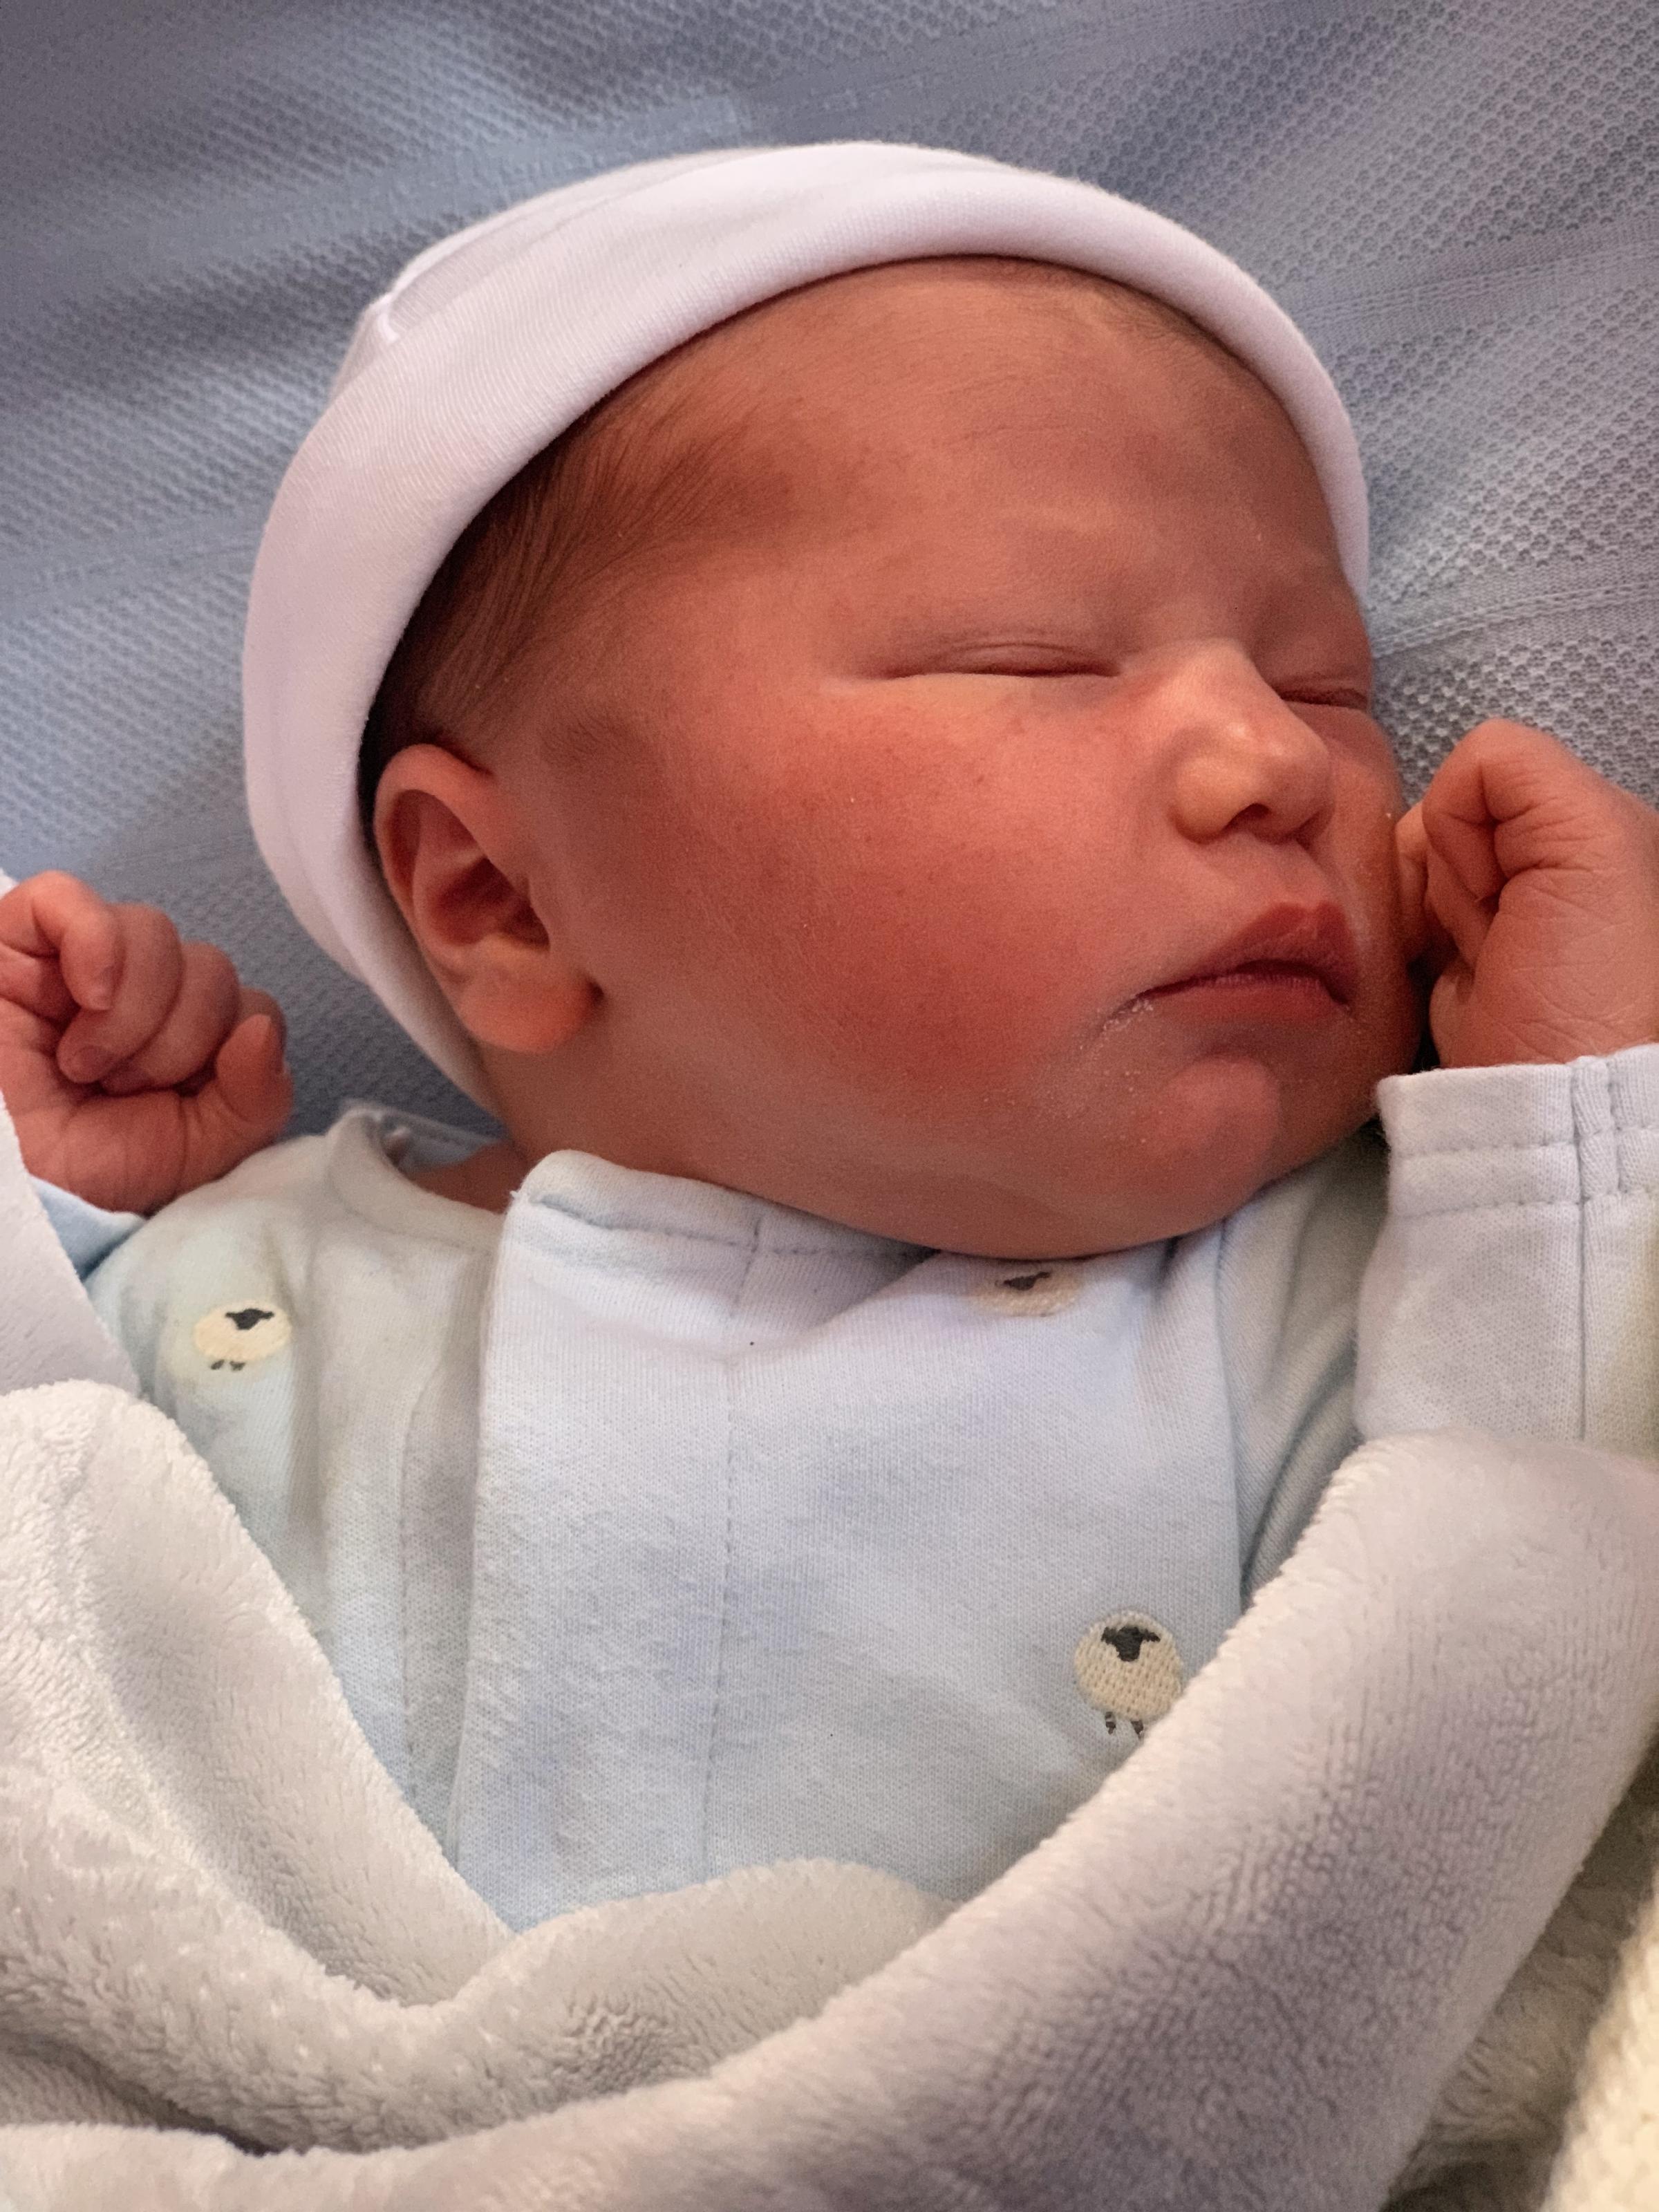 Bowie McJannett, of Padgate, born July 25, weighing 9lbs 7oz